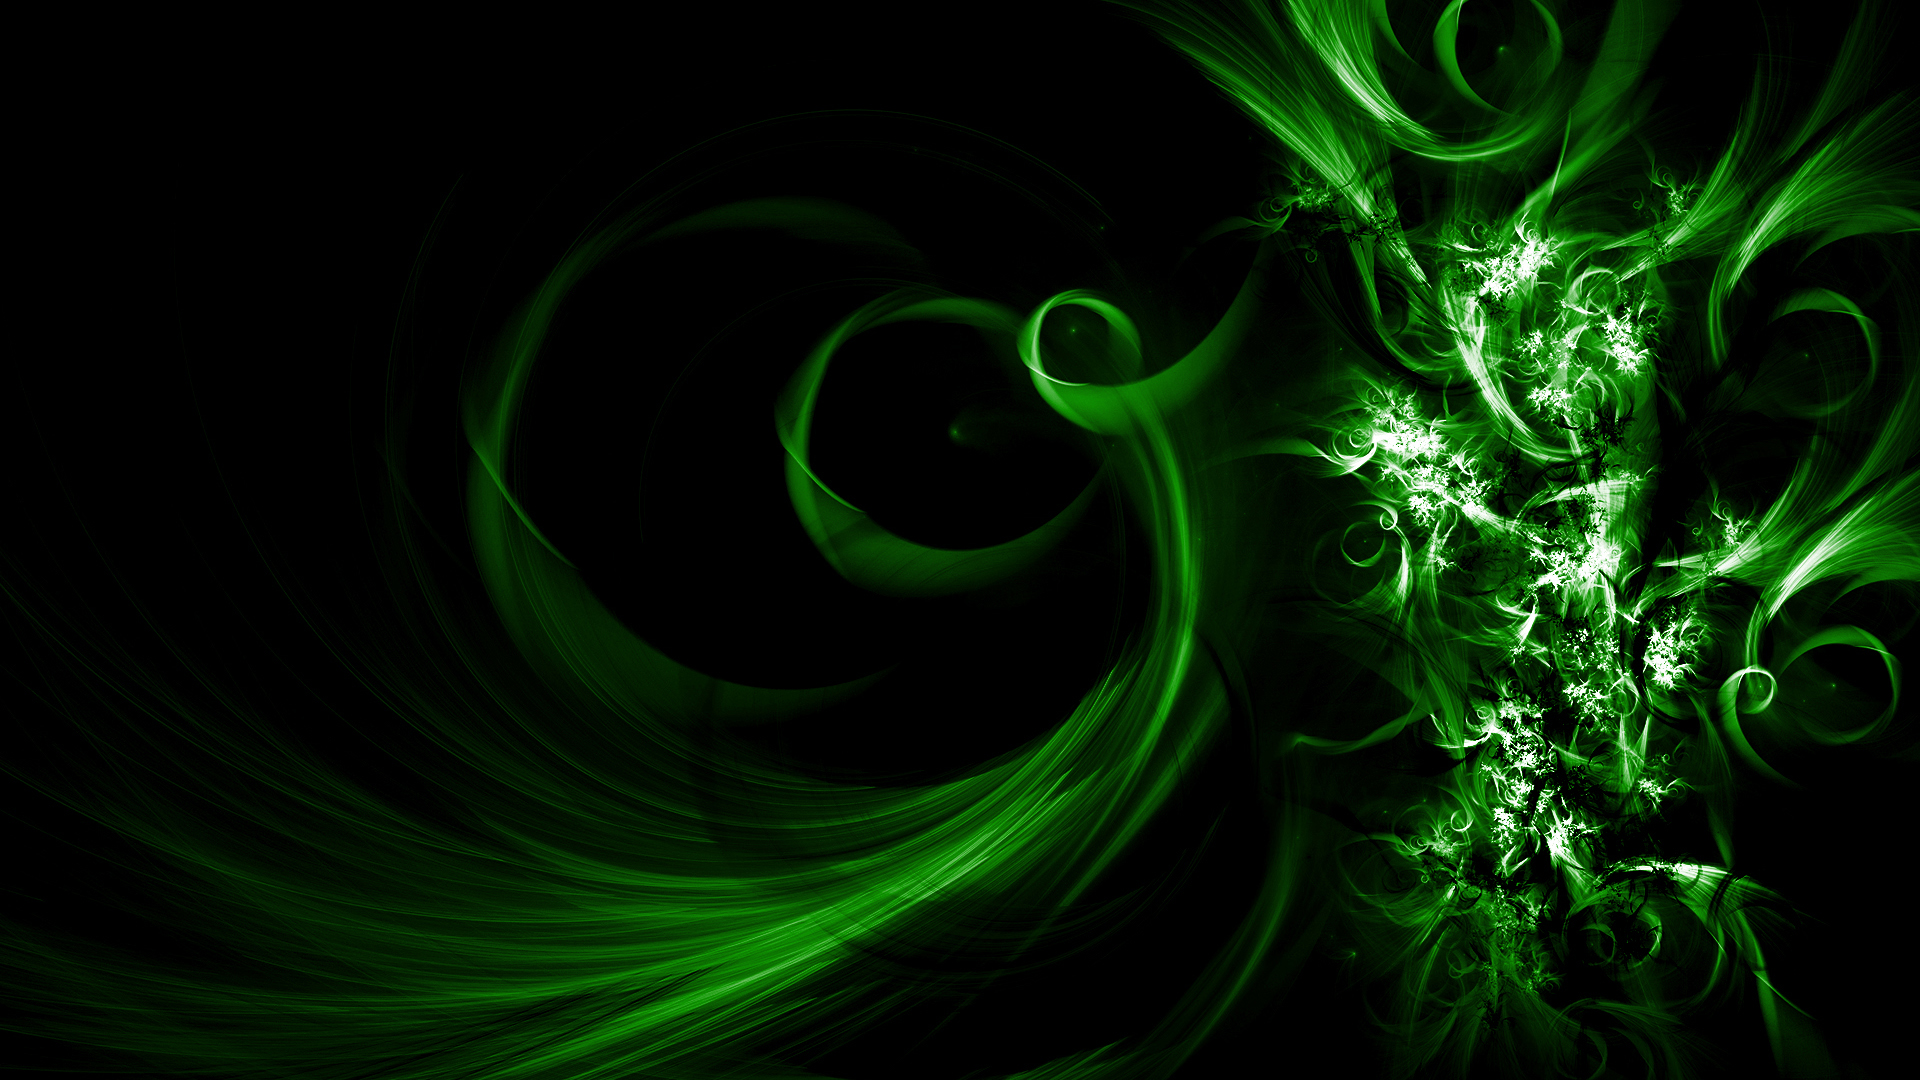 Free Download 19 X 1080 Wallpapers Full Hd Wallpapers 1080p Abstract Green 19x1080 For Your Desktop Mobile Tablet Explore 51 Full Hd Wallpapers 19 X 1080 Wallpaper 19x1080